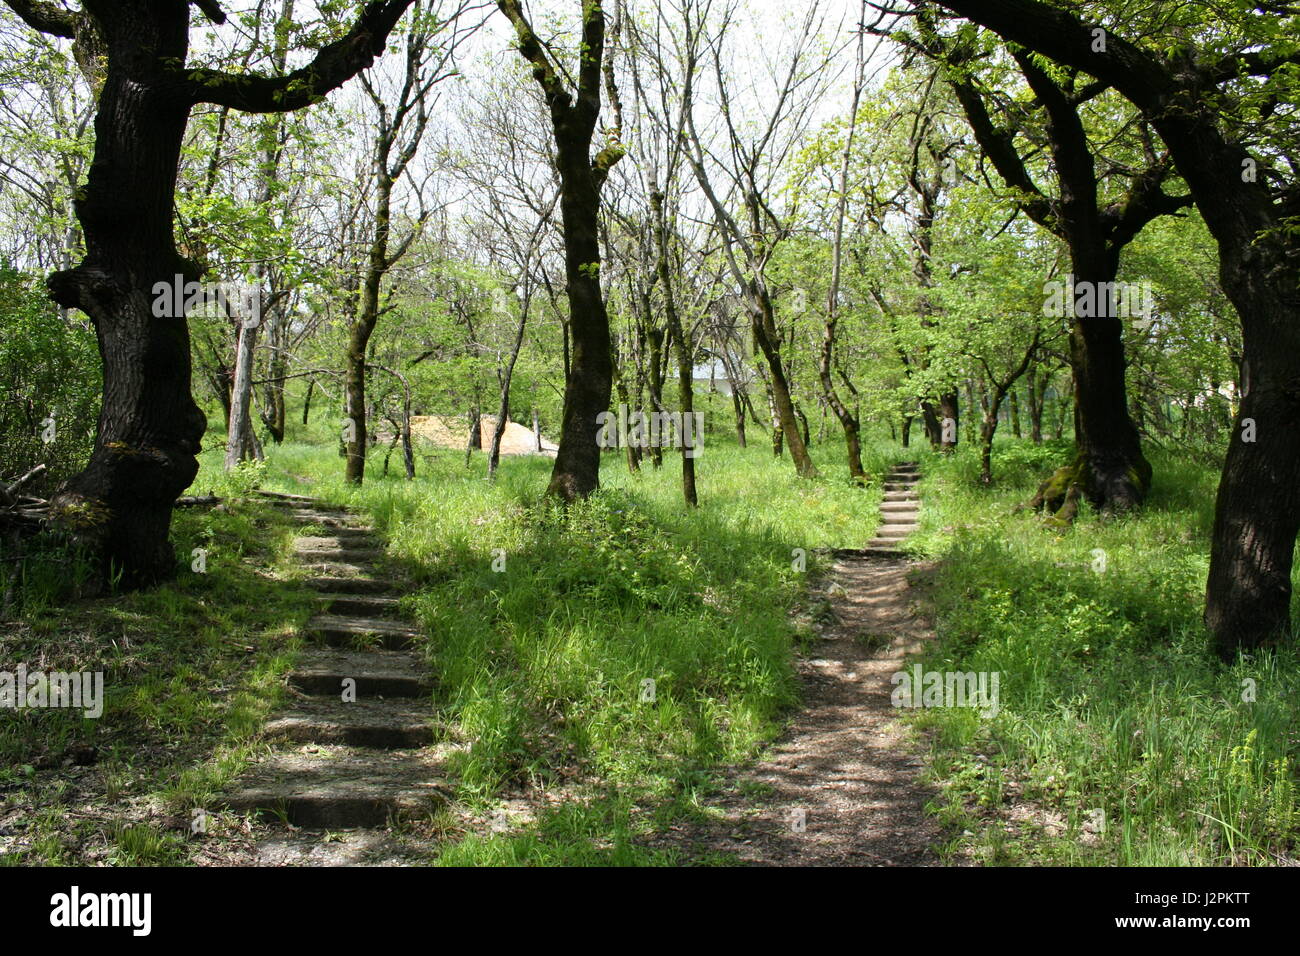 Two paths lead to different directions in the park Stock Photo